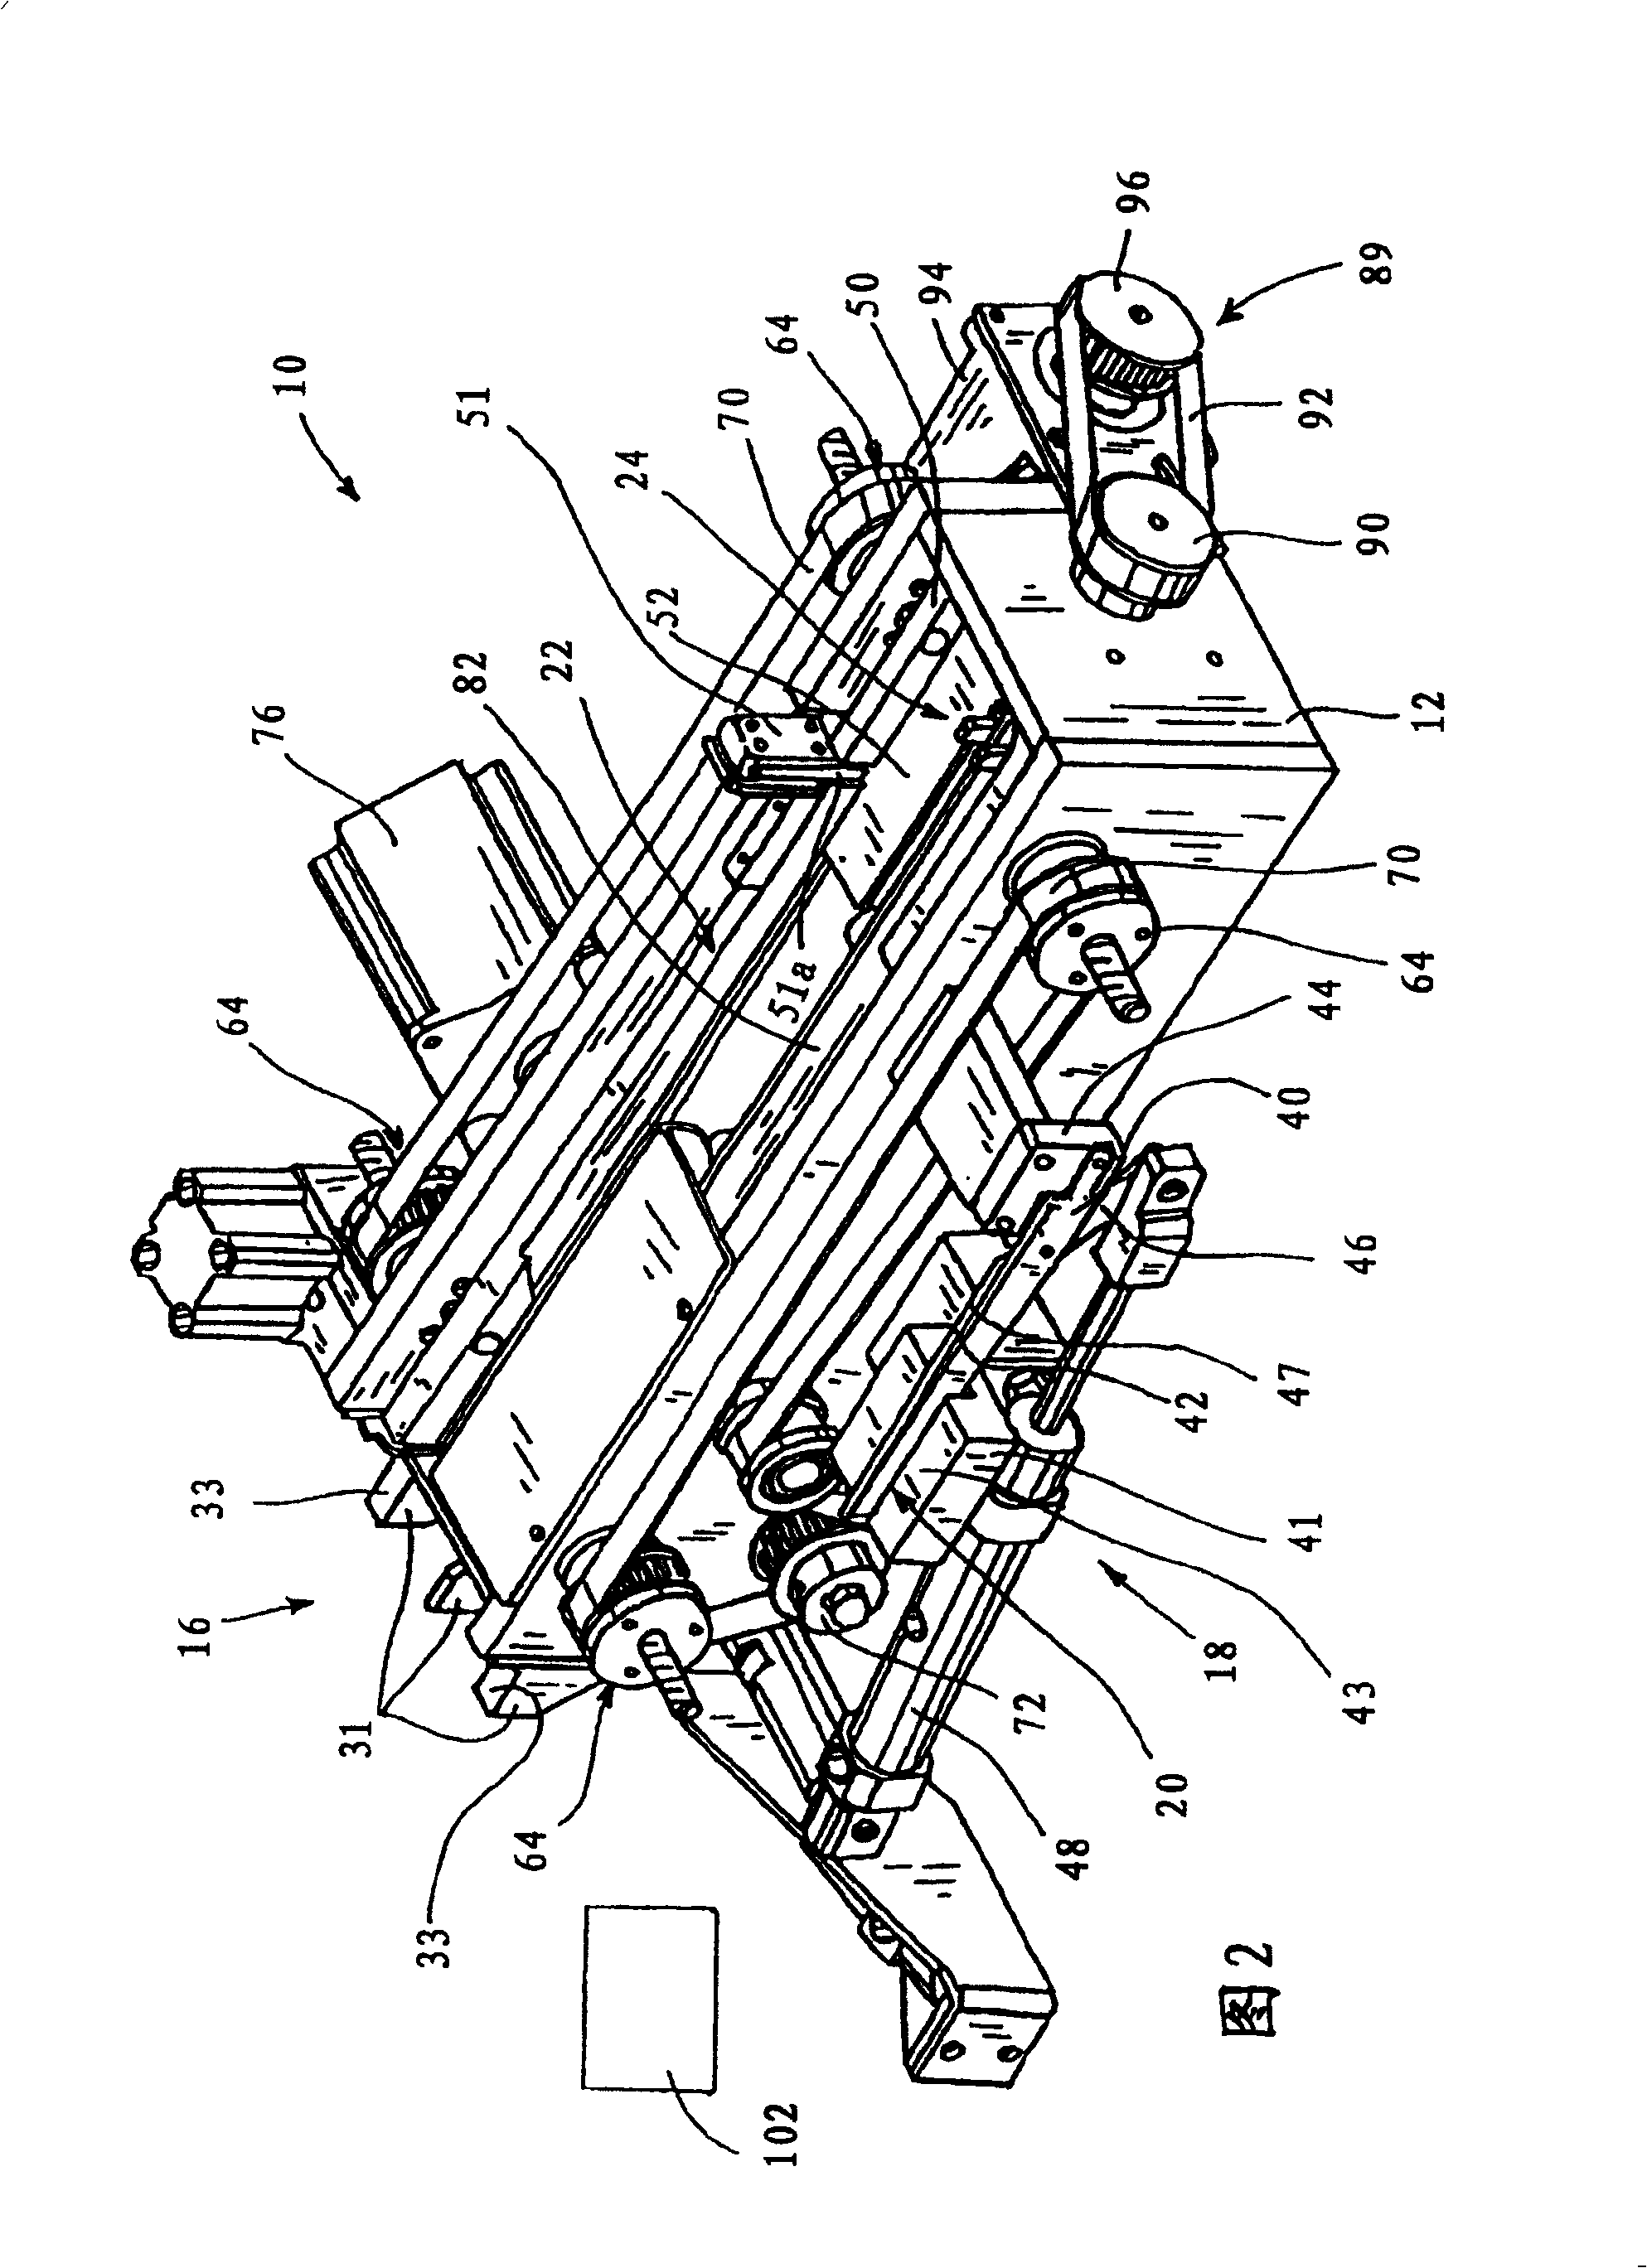 A device for cutting packages containing a plurality of product units